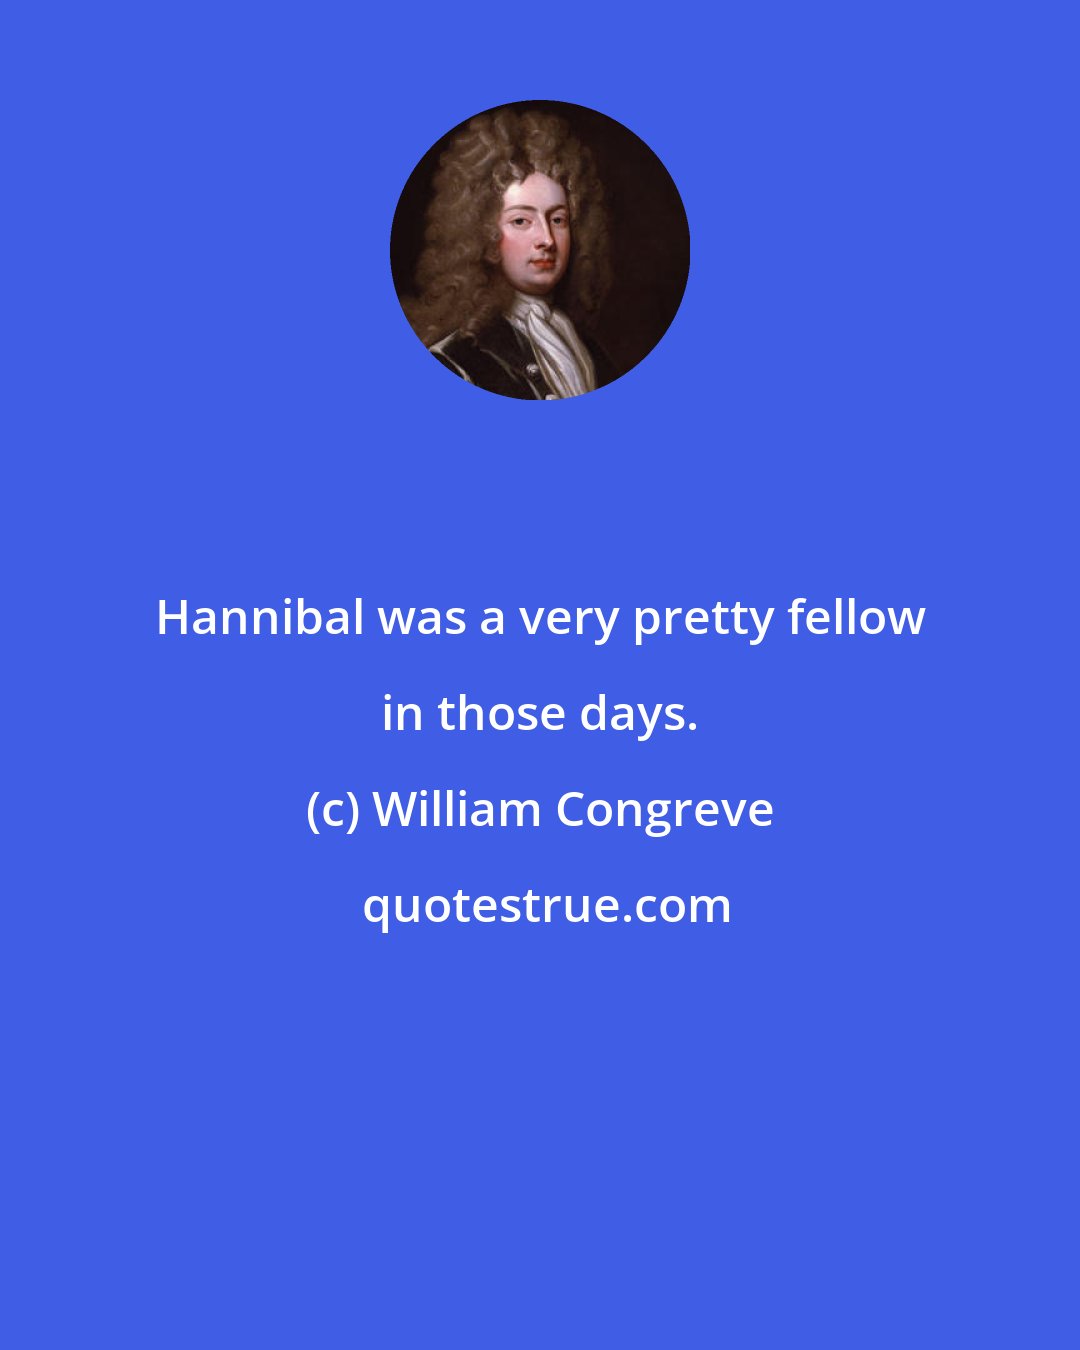 William Congreve: Hannibal was a very pretty fellow in those days.